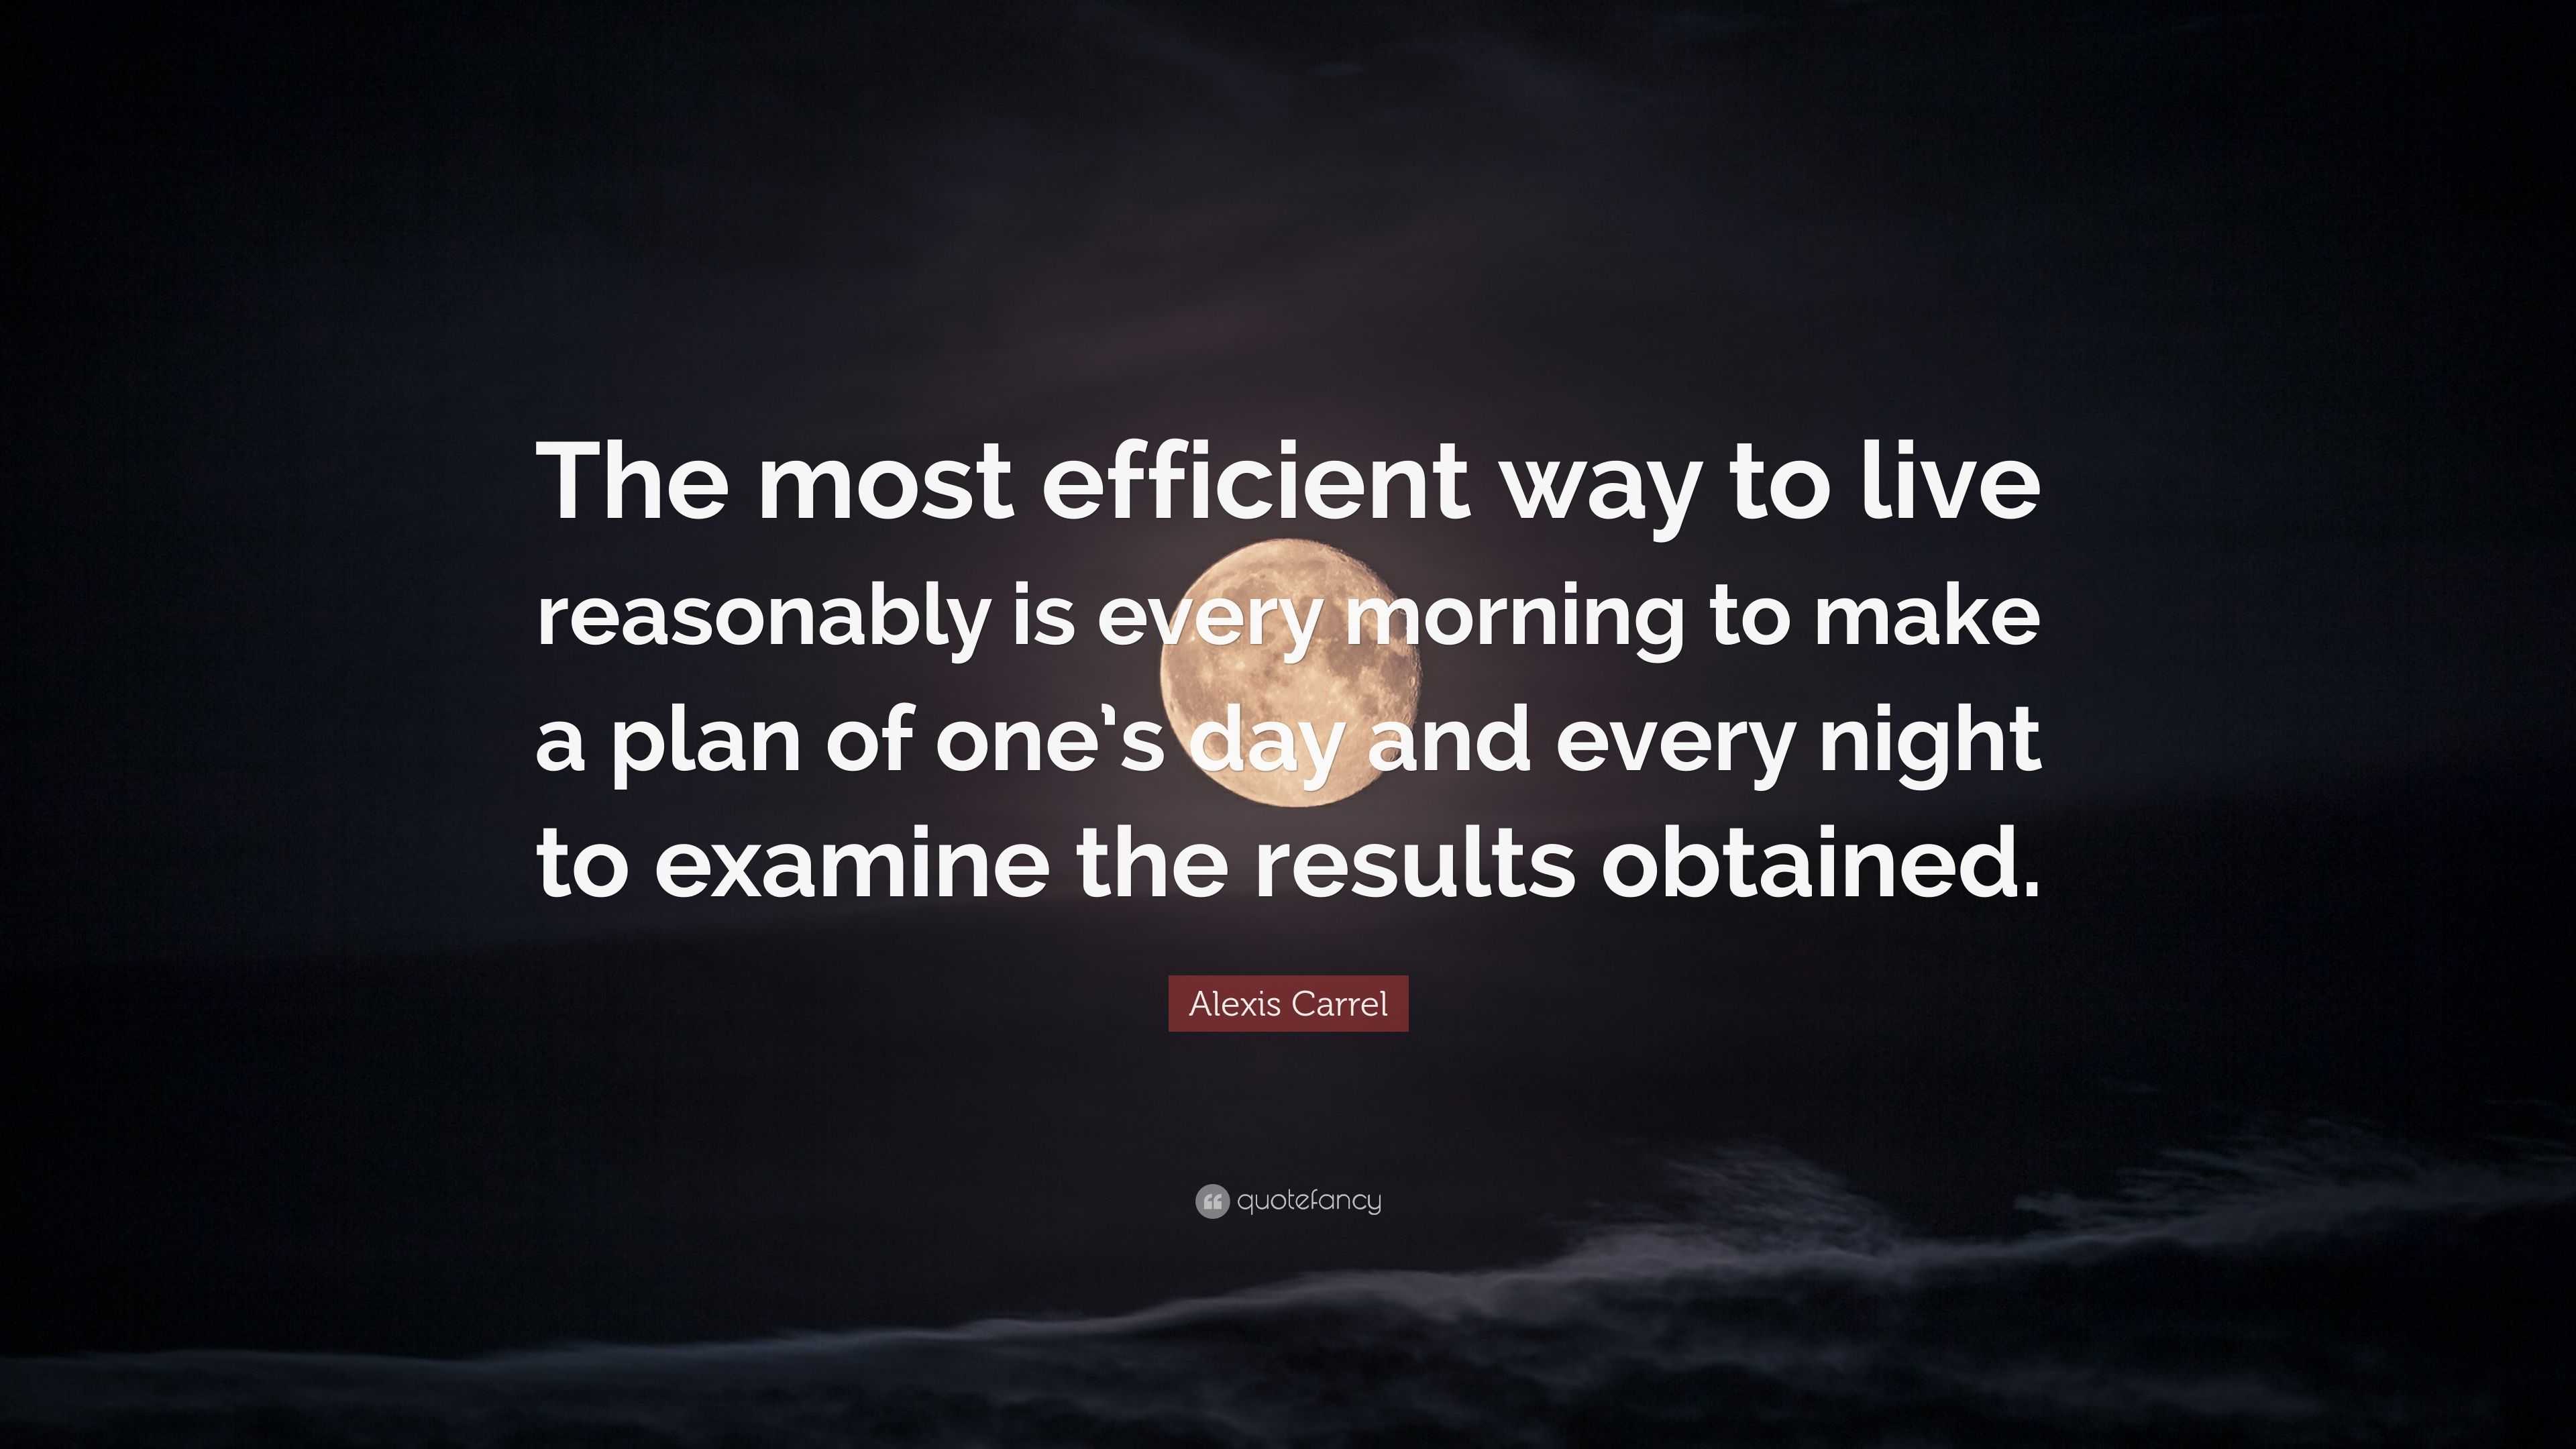 Alexis Carrel Quote The Most Efficient Way To Live Reasonably Is Every Morning To Make A Plan Of One S Day And Every Night To Examine The Re